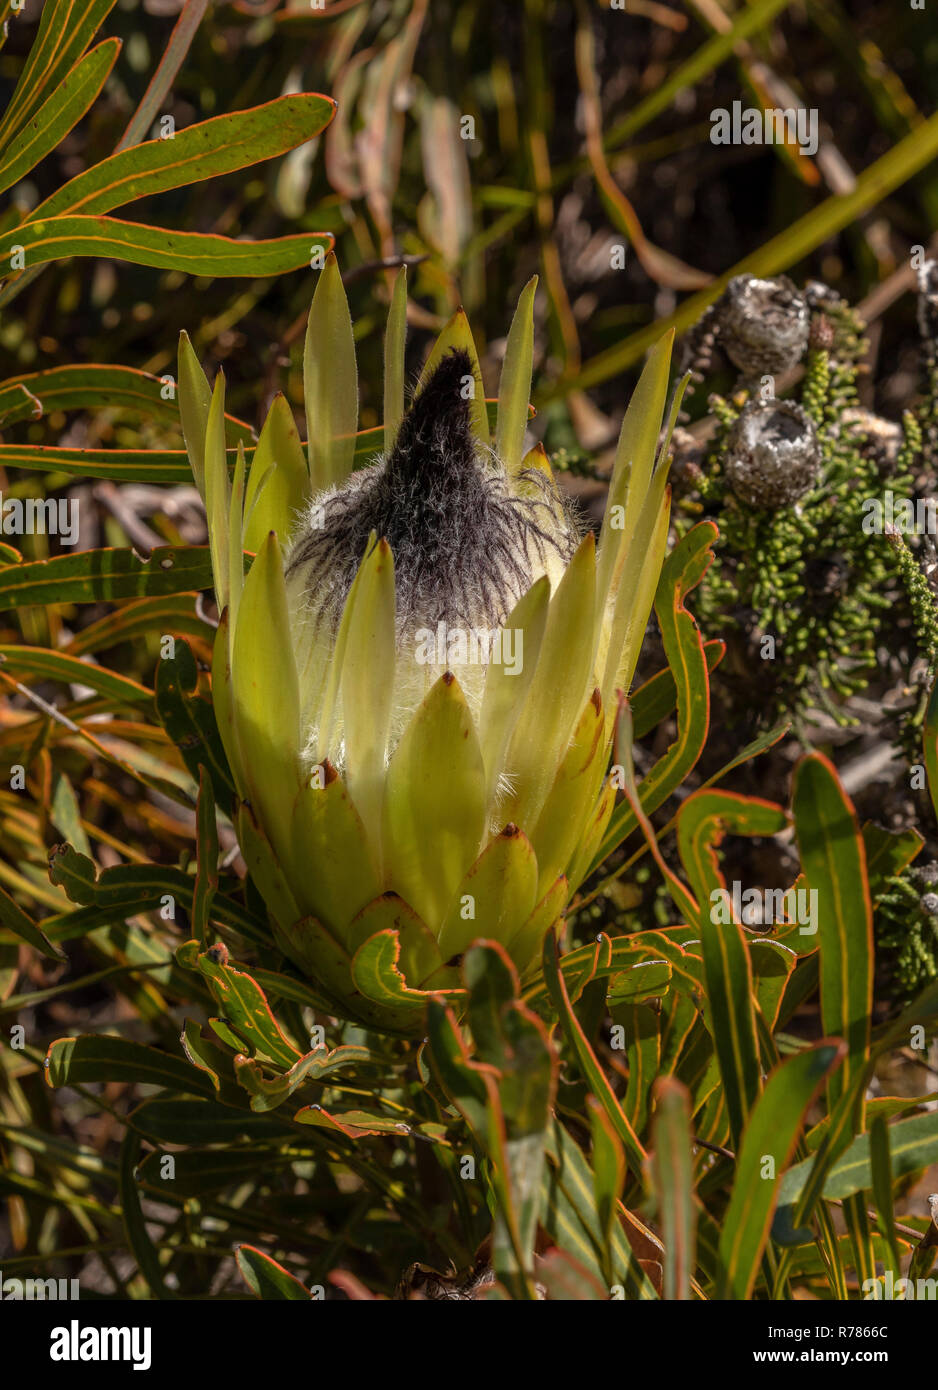 long-leaf sugarbush, Protea longifolia, in flower in fynbos, Fernkloof Nature Reserve, Cape, South Africa. Stock Photo